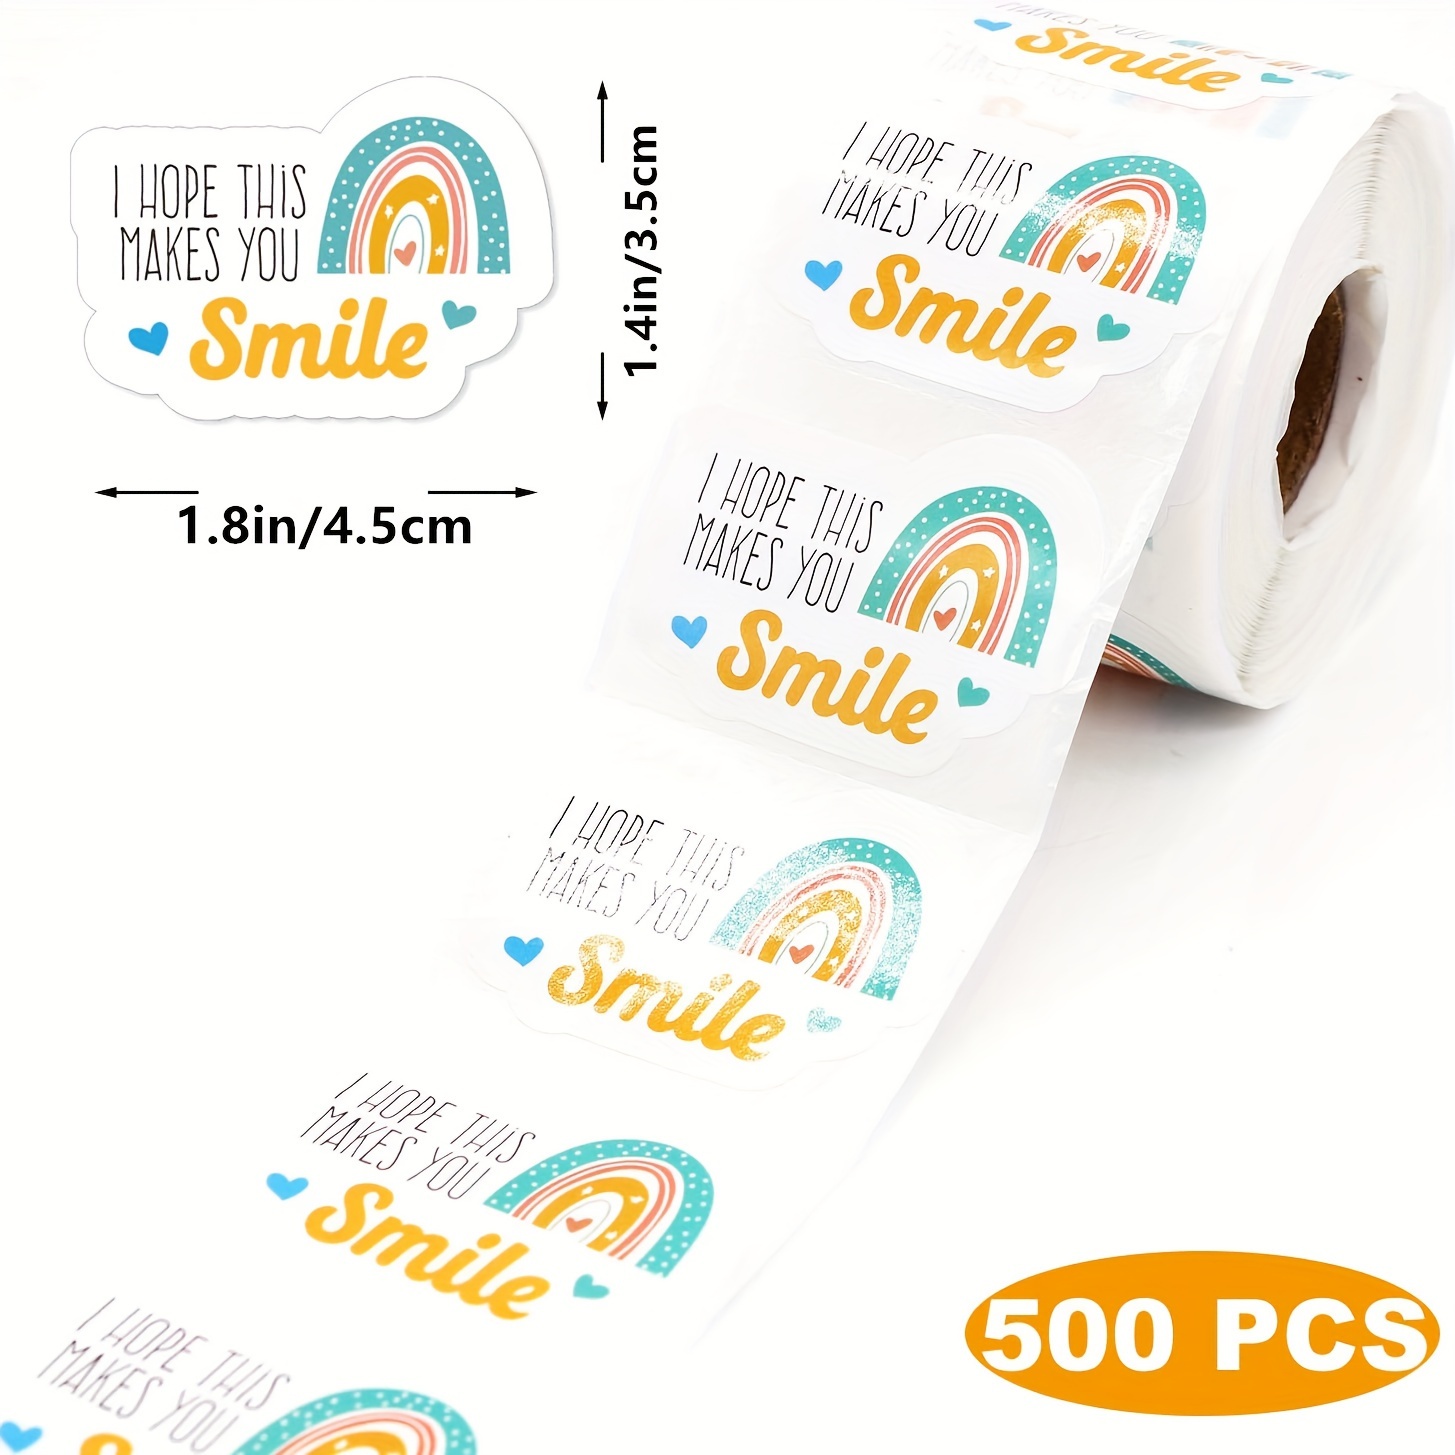 

500 Stickers/roll, 1.8*1.4 Inch I Wish This Could Make You Smile Stickers, Rainbow Stickers, Thank You Stickers, Small Shop Stickers, Small Business, Handmade Stickers, Packaging Stickers